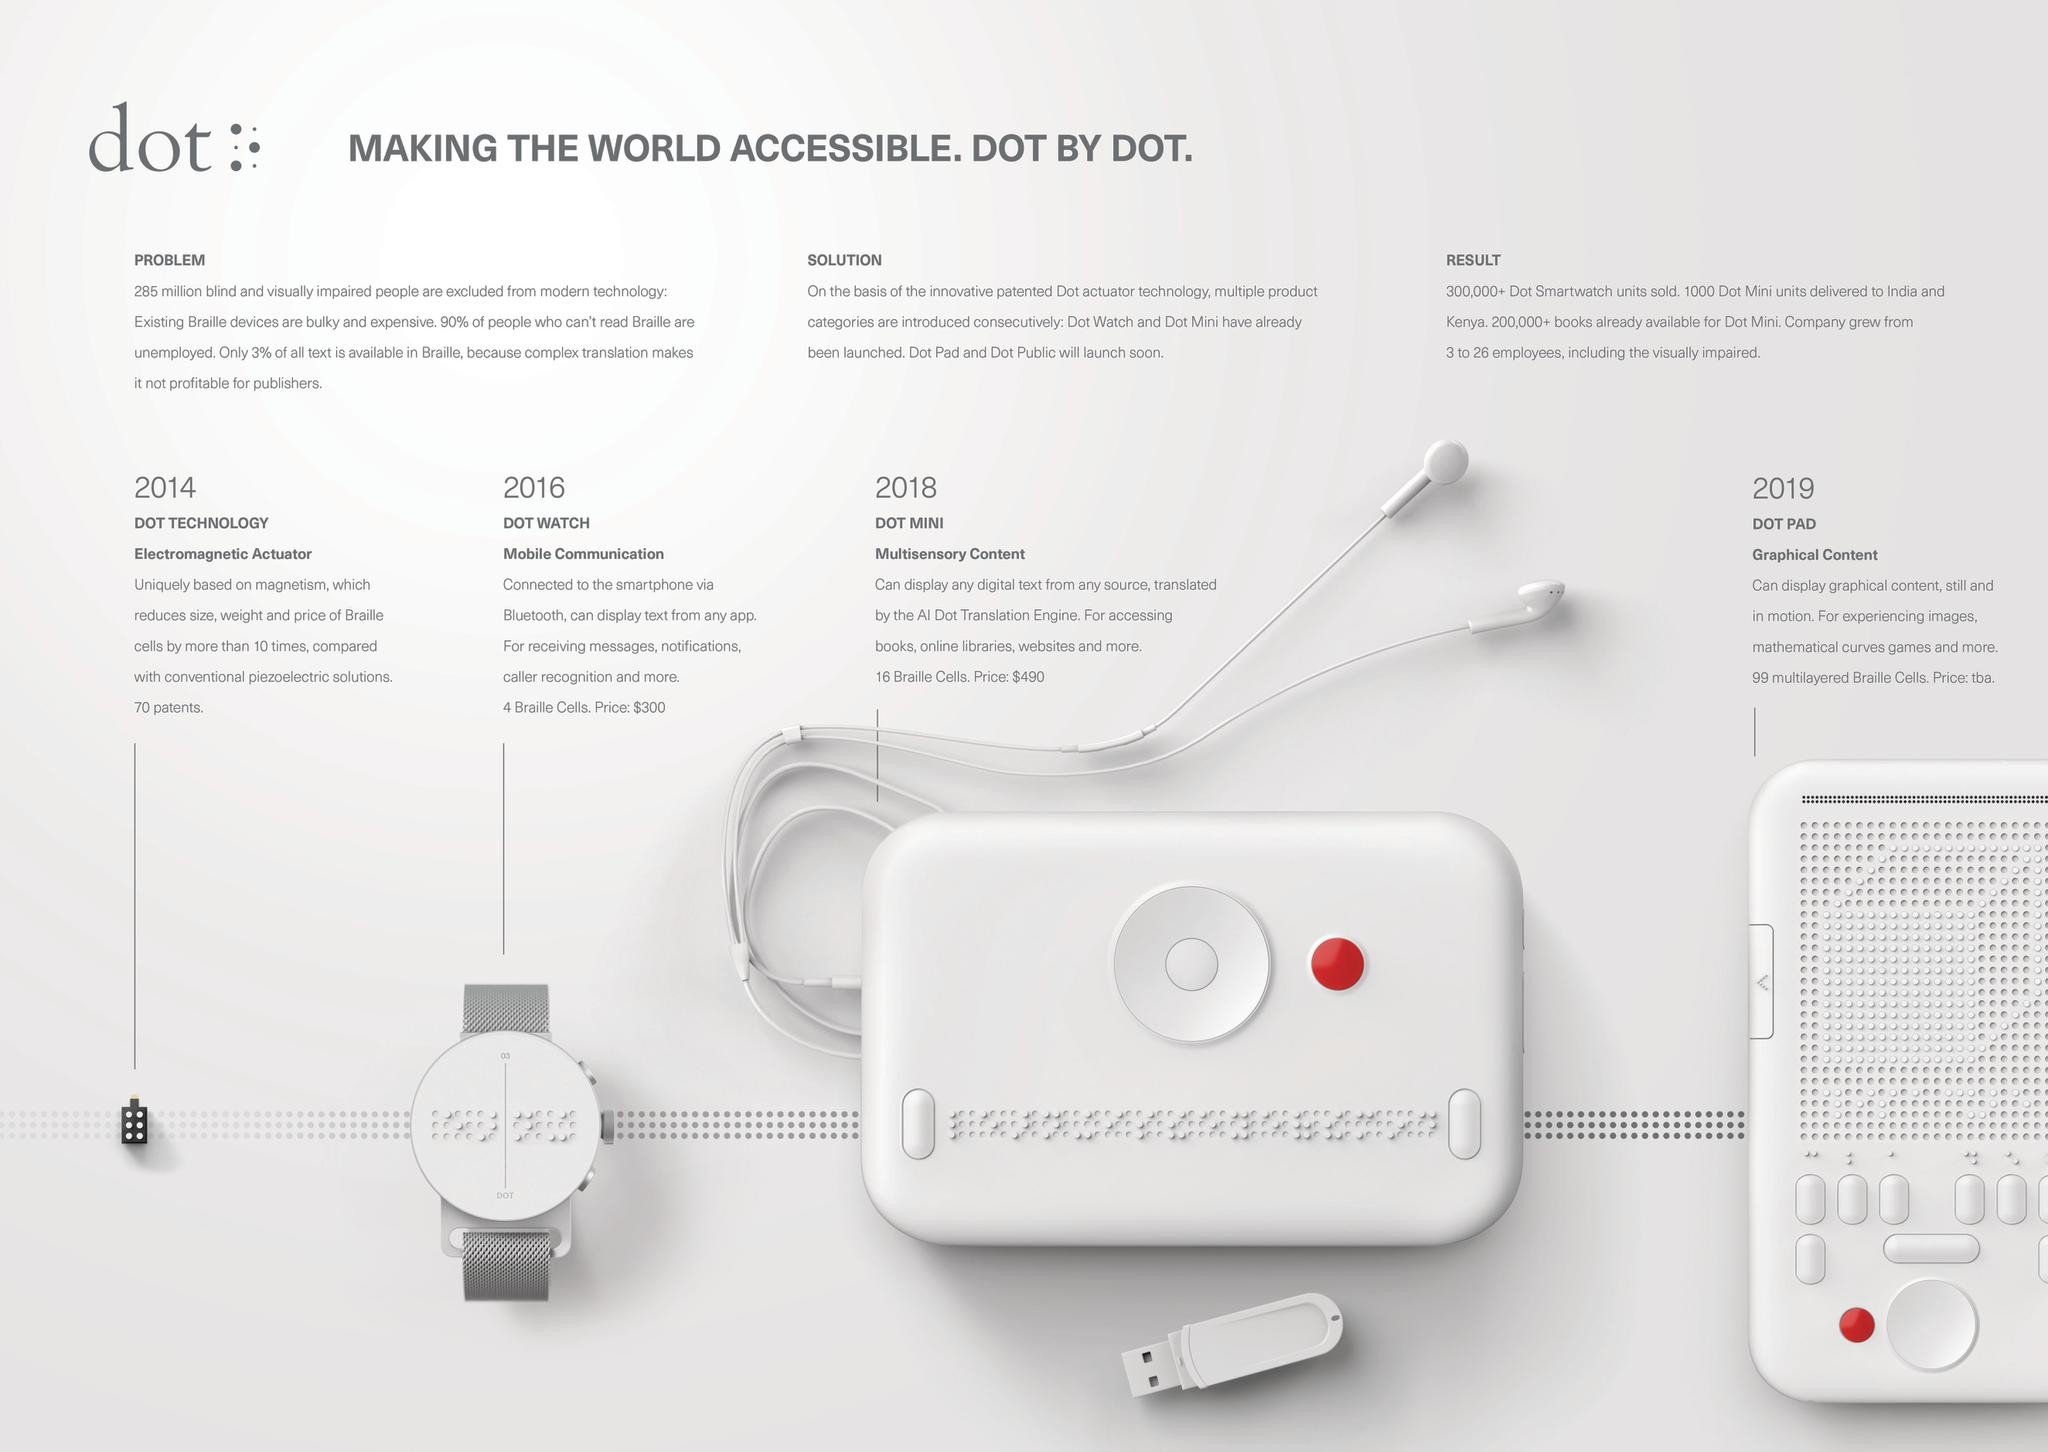 Making The World Accessible, Dot by Dot.